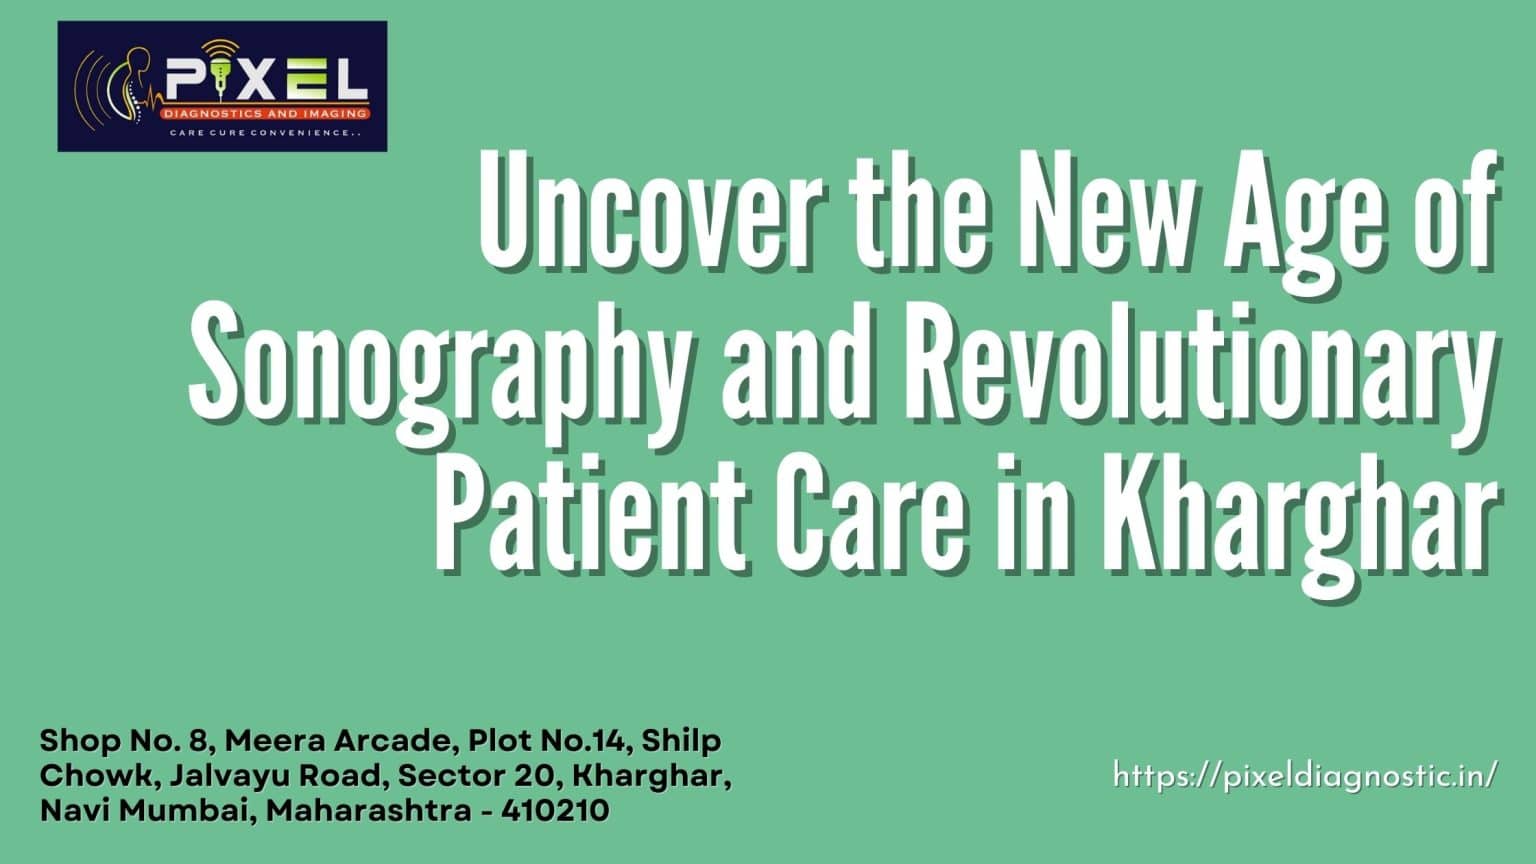 Uncover the New Age of Sonography and Revolutionary Patient Care in Kharghar